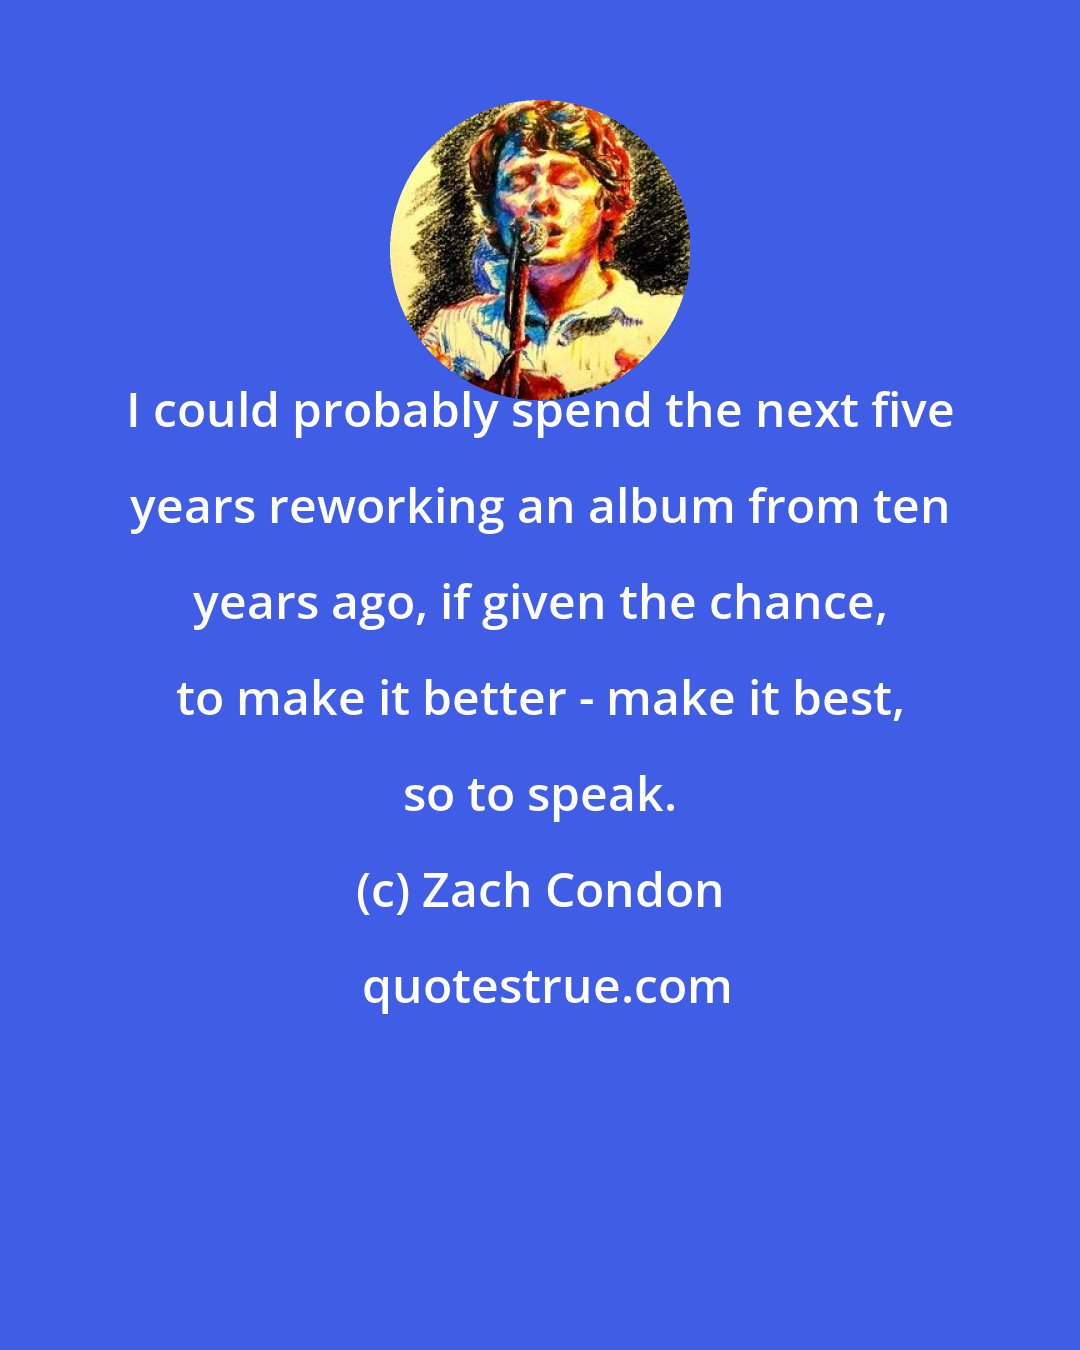 Zach Condon: I could probably spend the next five years reworking an album from ten years ago, if given the chance, to make it better - make it best, so to speak.